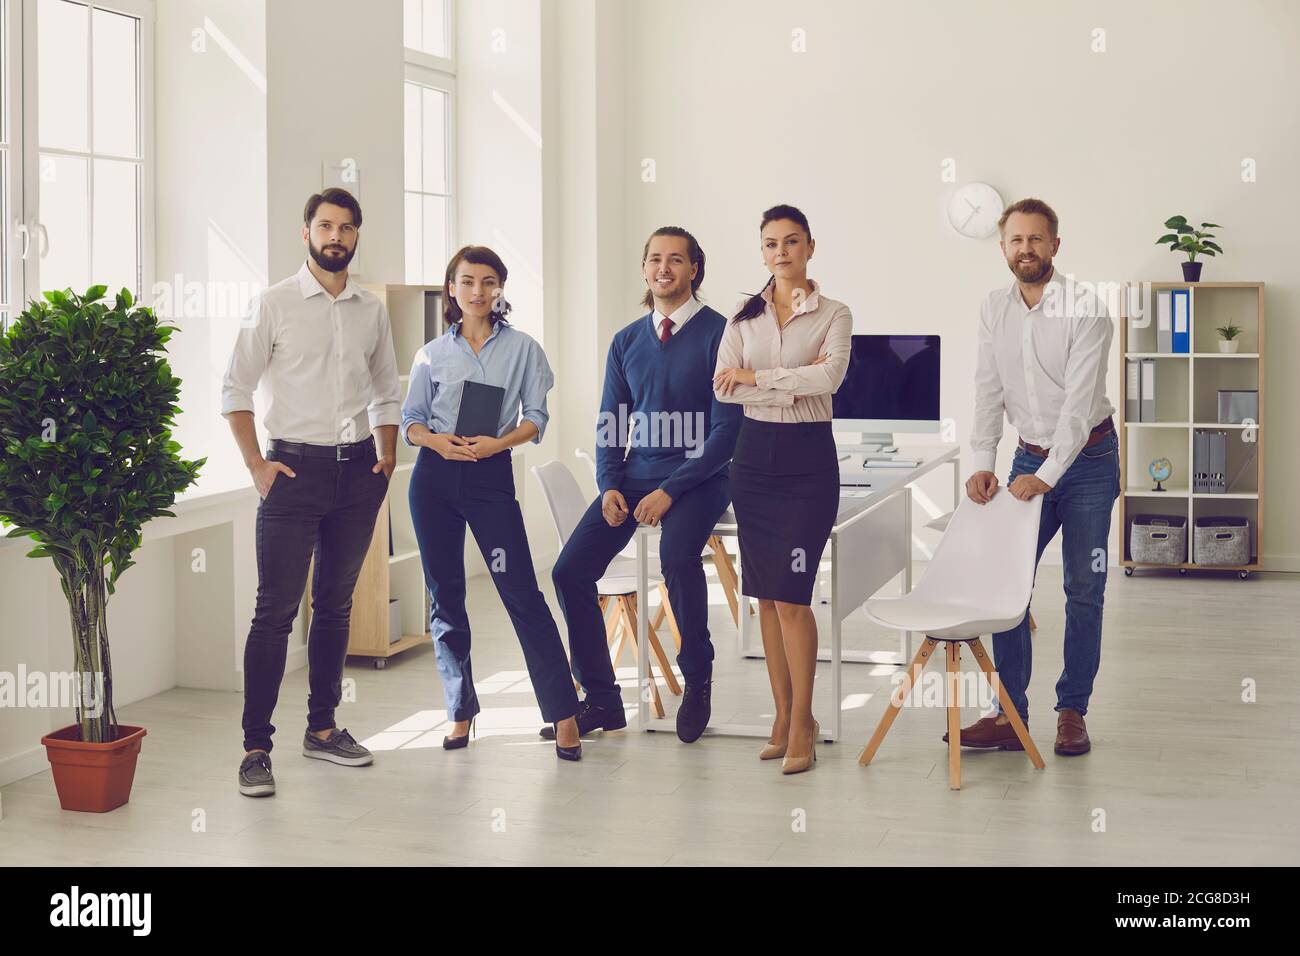 Group of young professionals standing in modern office ready for corporate meeting Stock Photo